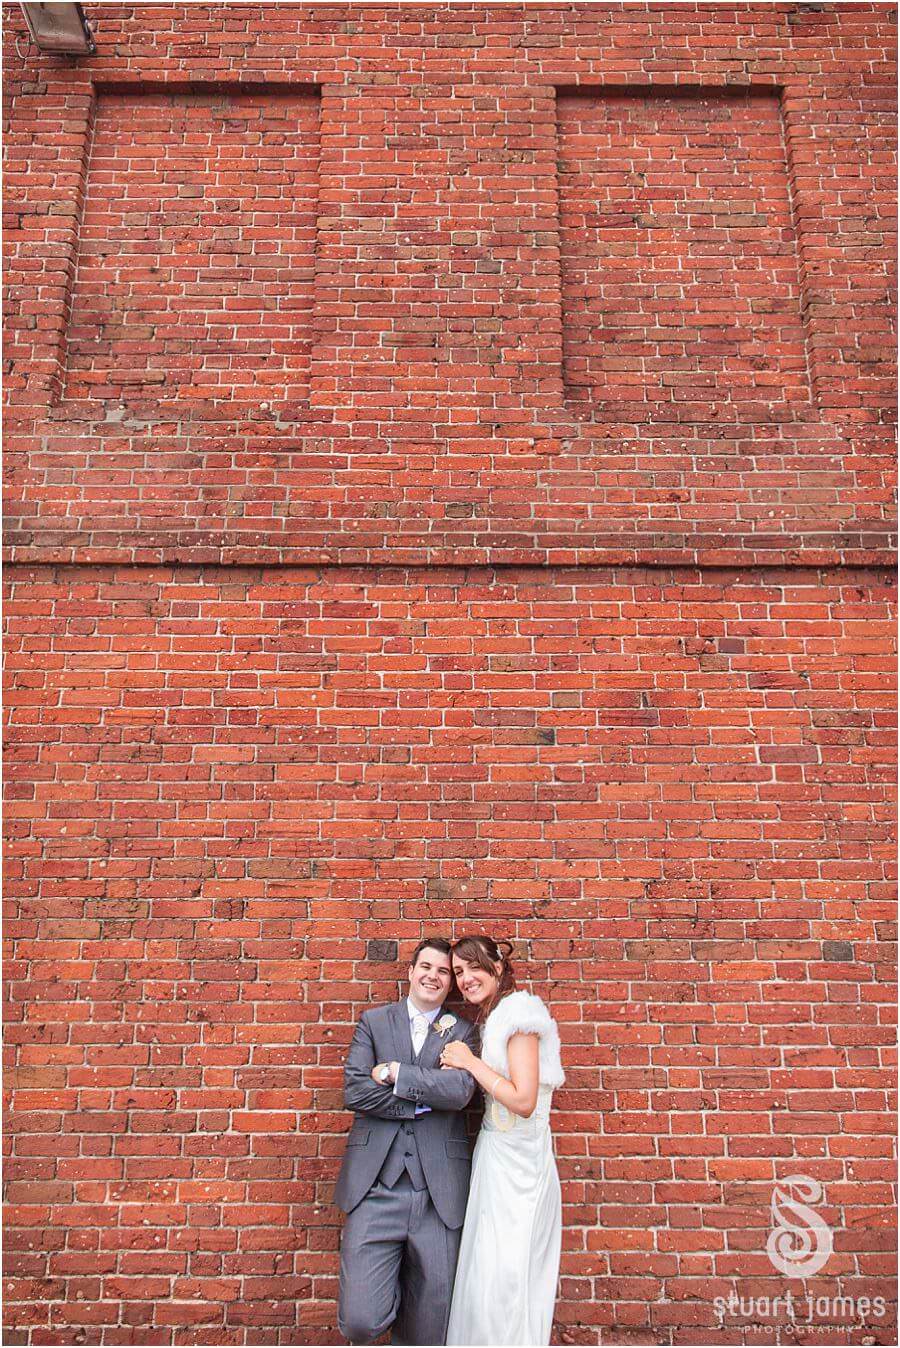 Elegant modern portraits of bride and groom at The Barns in Cannock by Cannock Wedding Photographer Stuart James